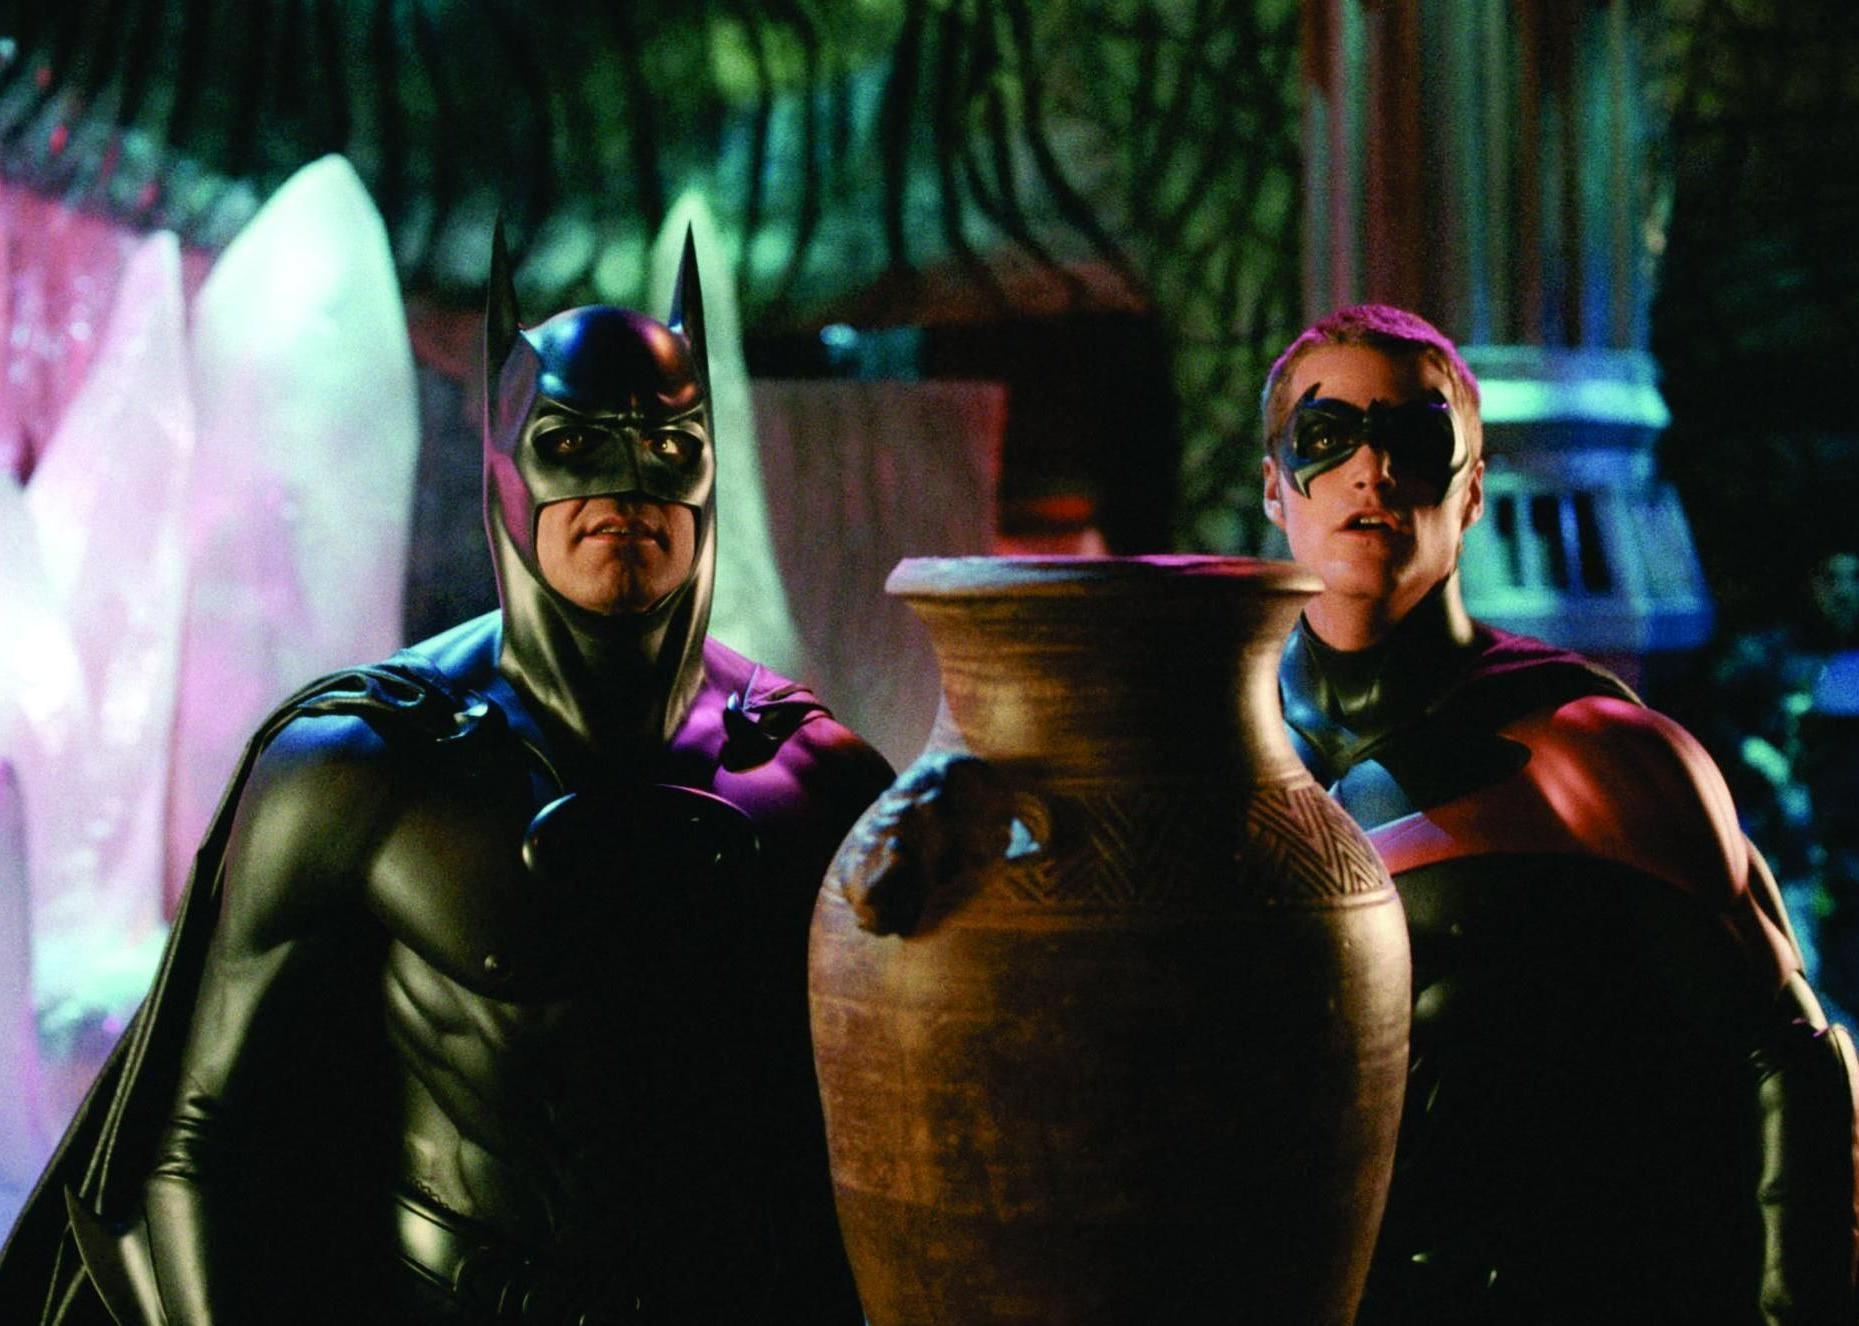 George Clooney and Chris O'Donnell as batman and robin.